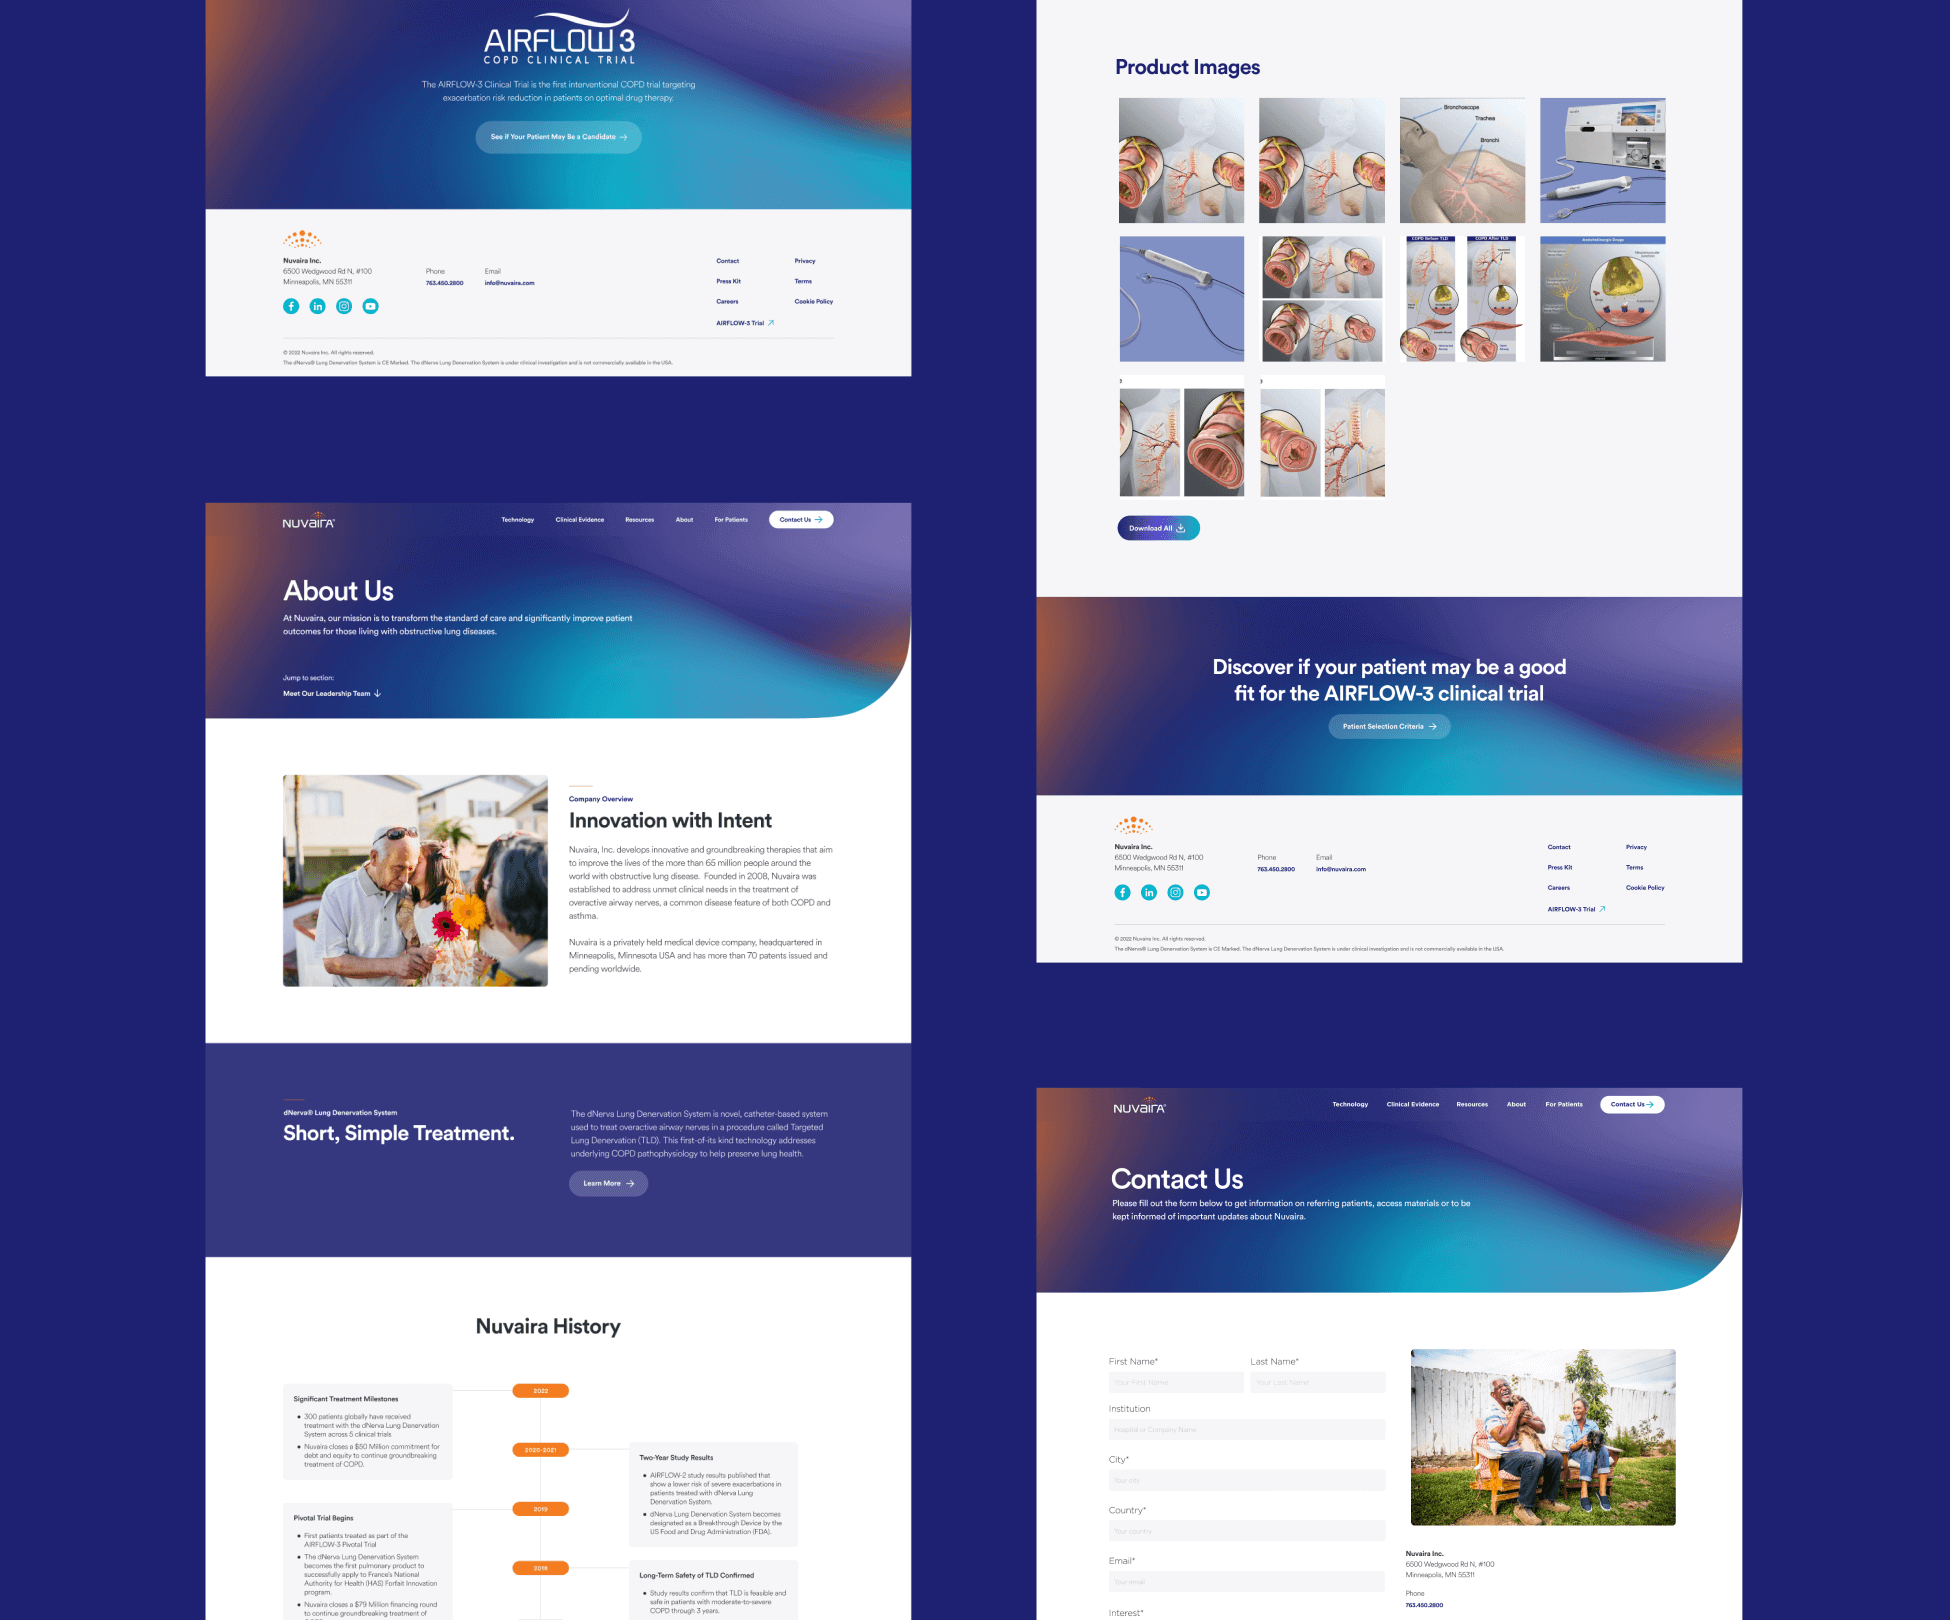 Four examples of Nuvaira's redesigned site, including the home page, About Us page, and products page